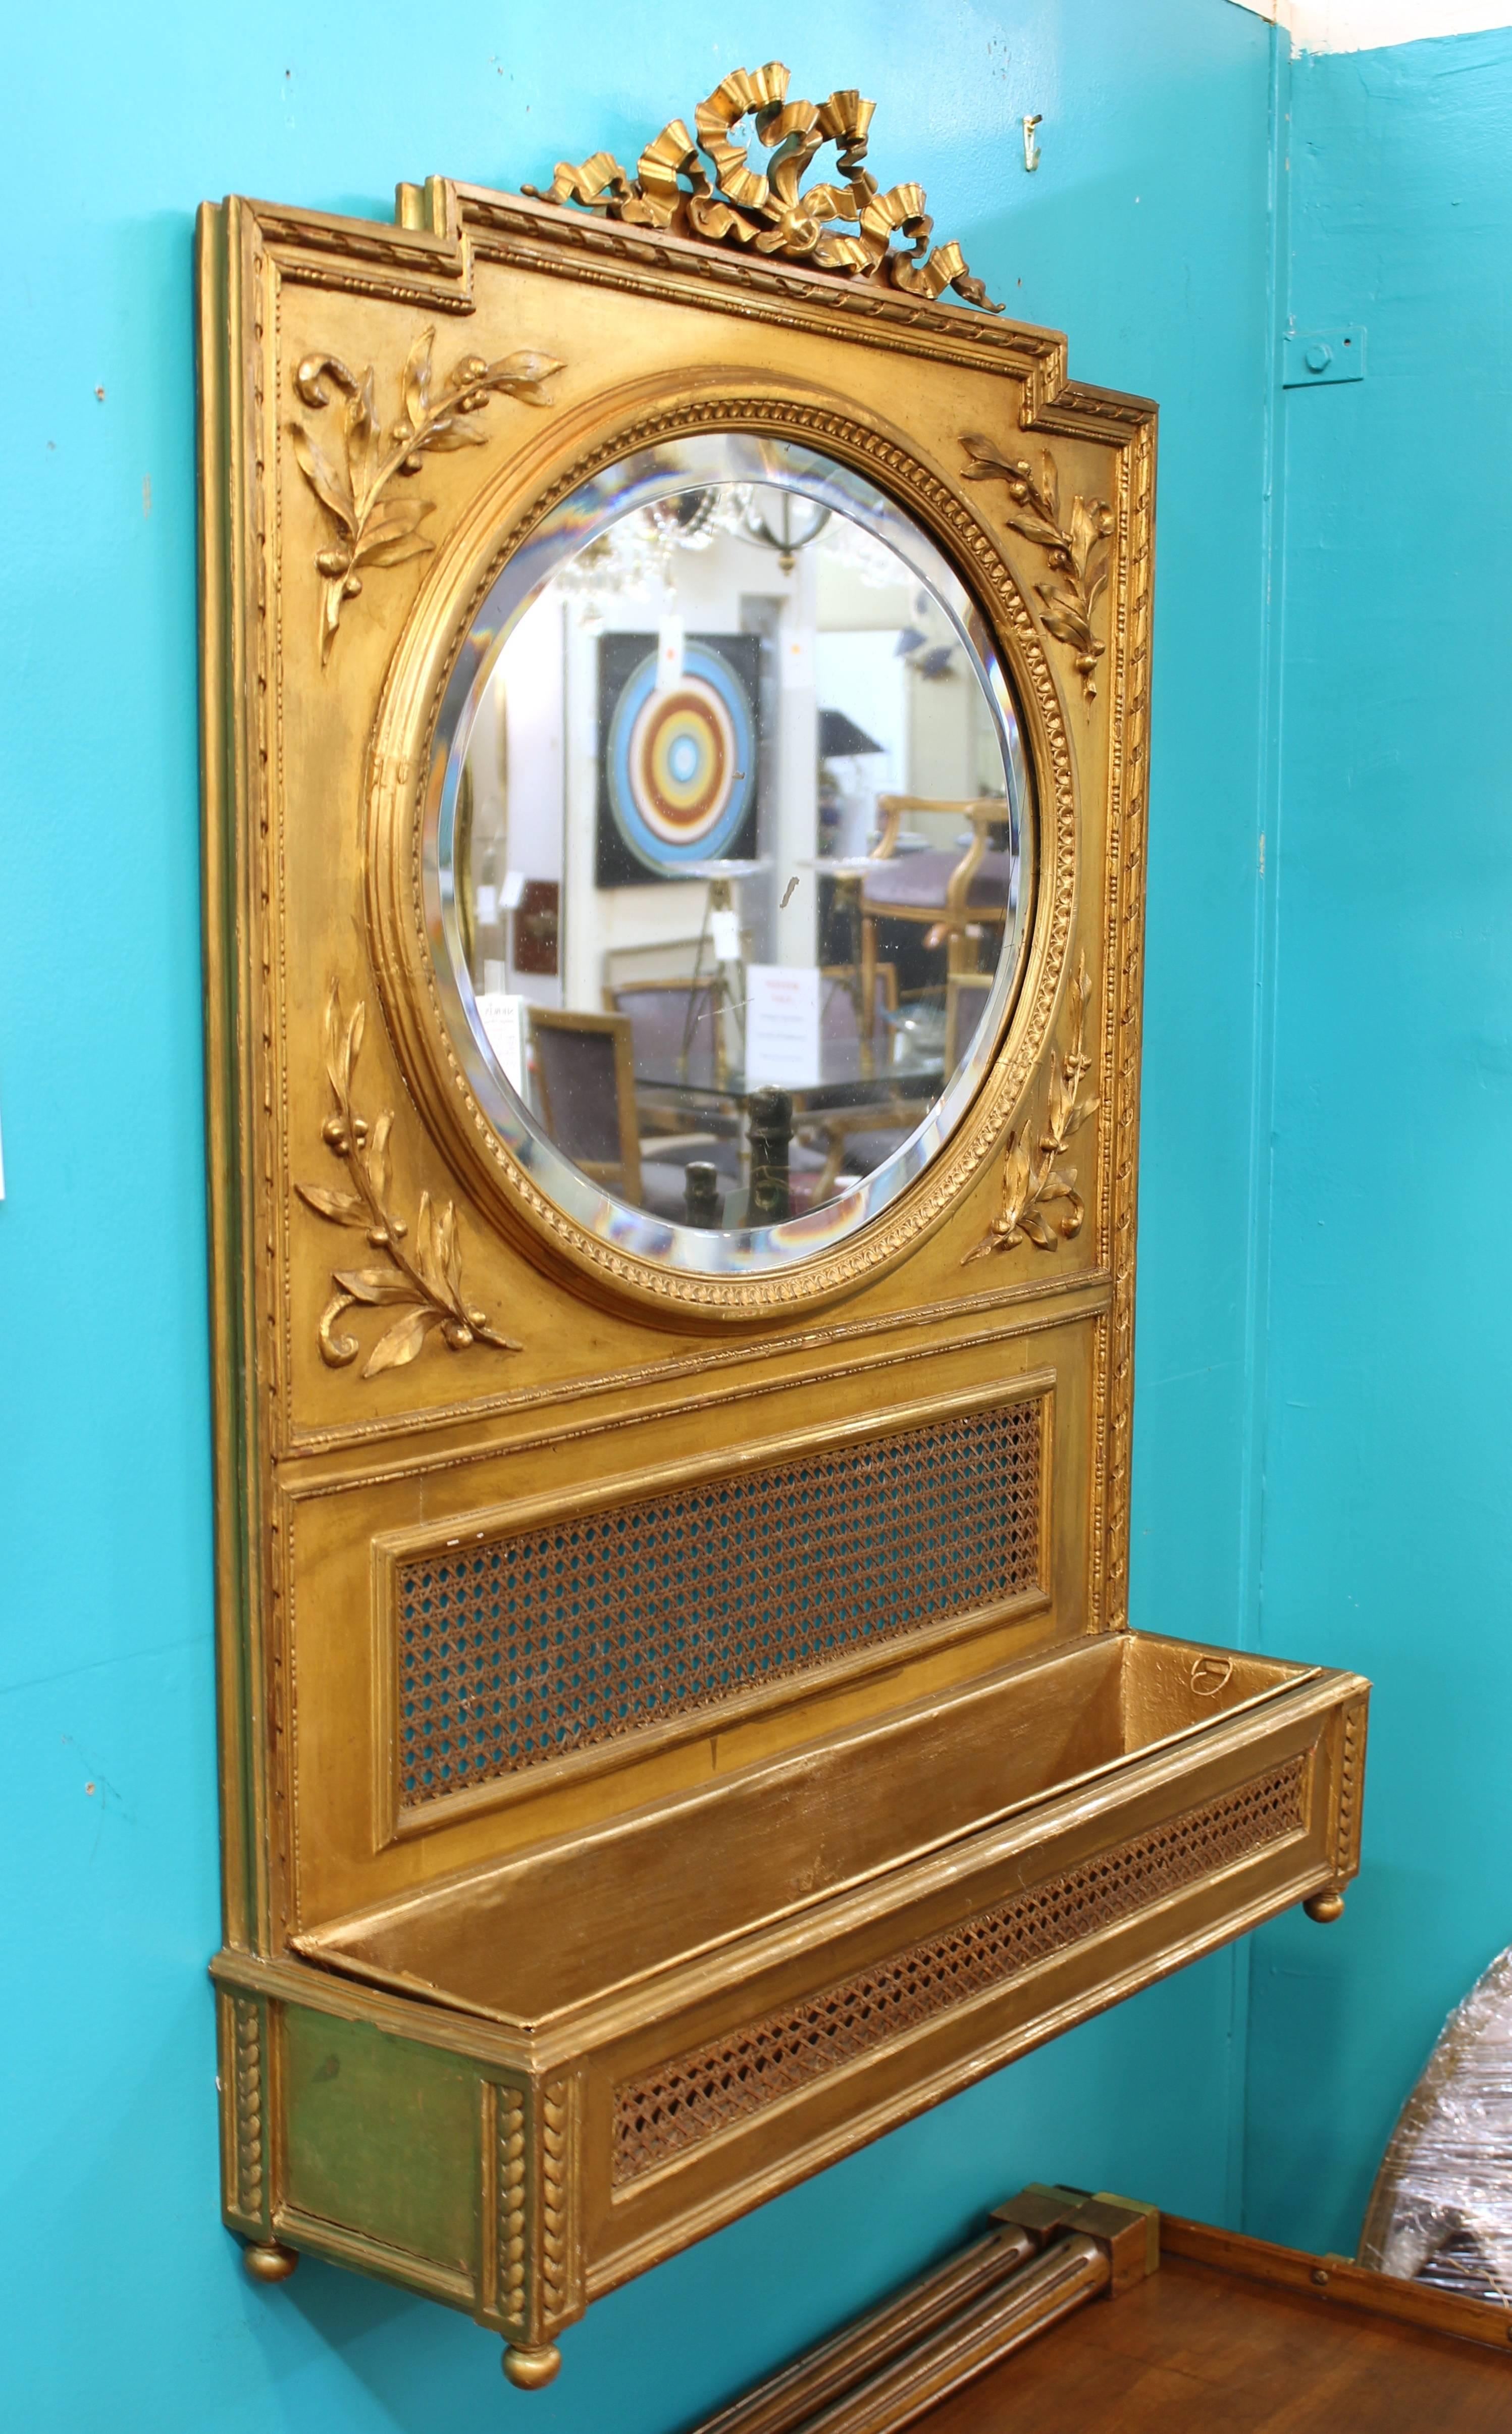 A Victorian gilded round bevelled mirror with planter, in neoclassical style. The wood is hand-carved and caned, and has a bronze fragment on top that is reminiscent of the style of Louis XVI.
The piece was made in France in the 1880s and is in